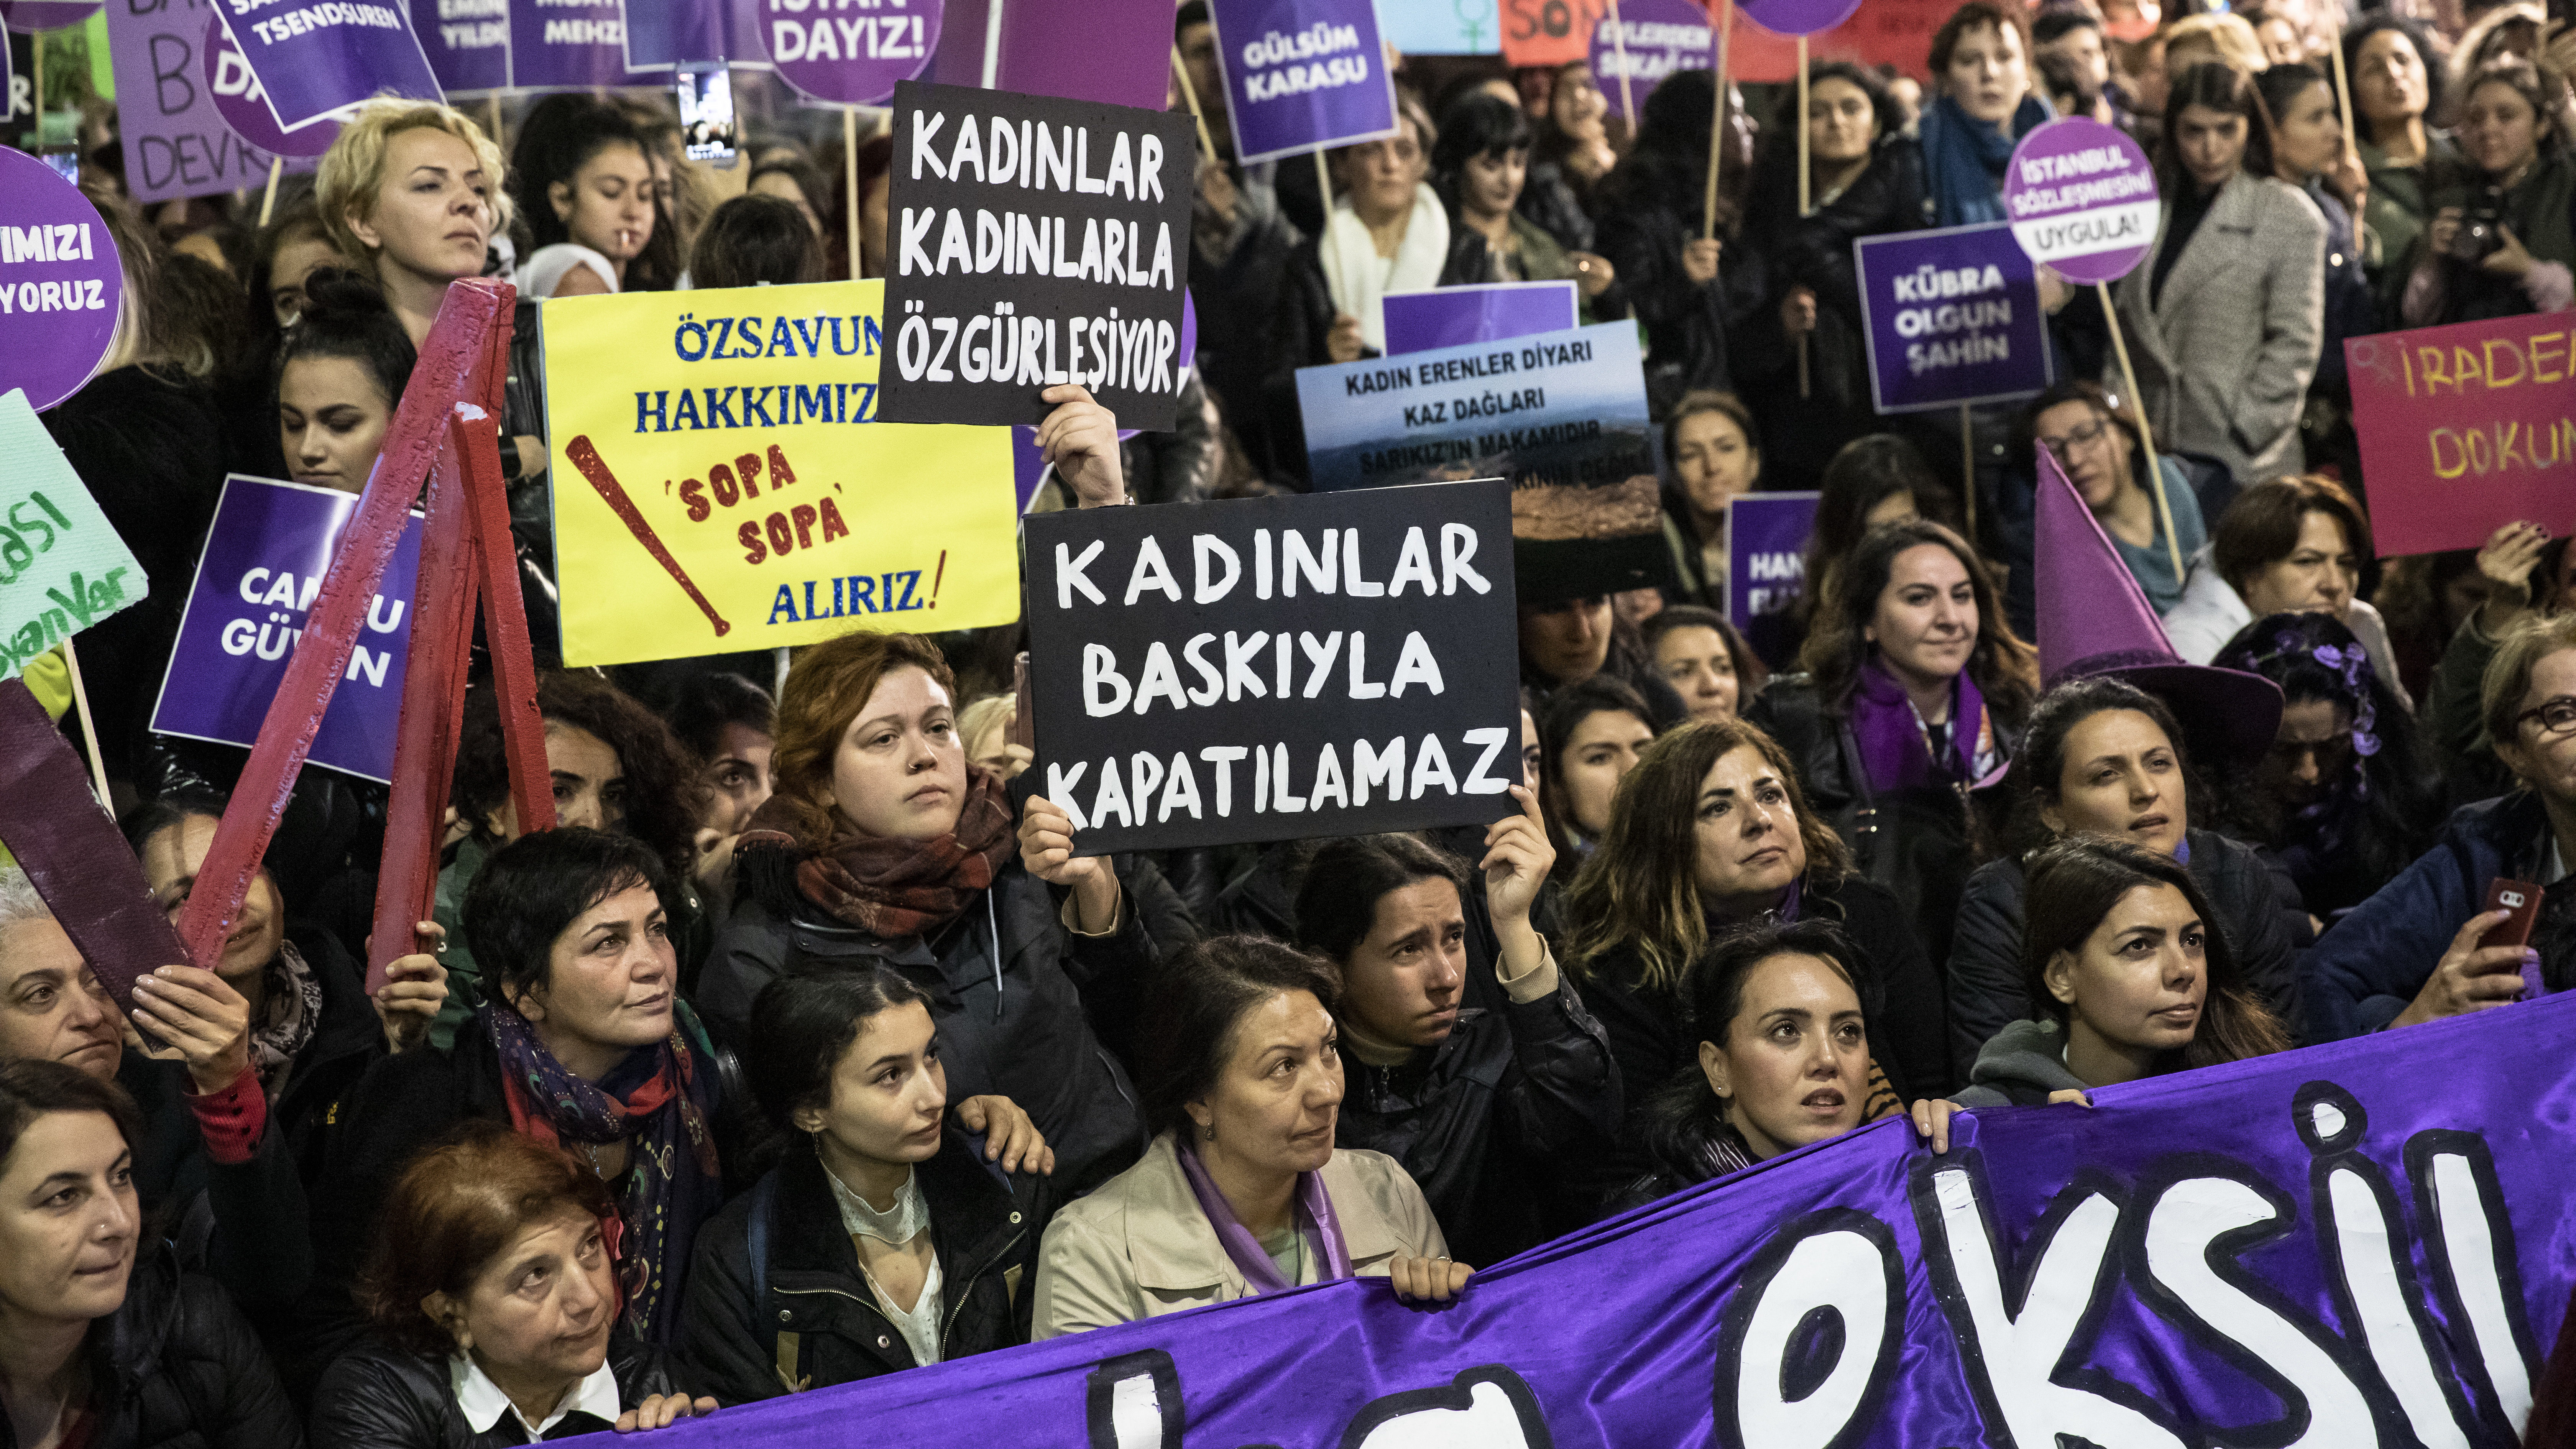 Protesters: Turkey Not Implementing Laws to Protect Women